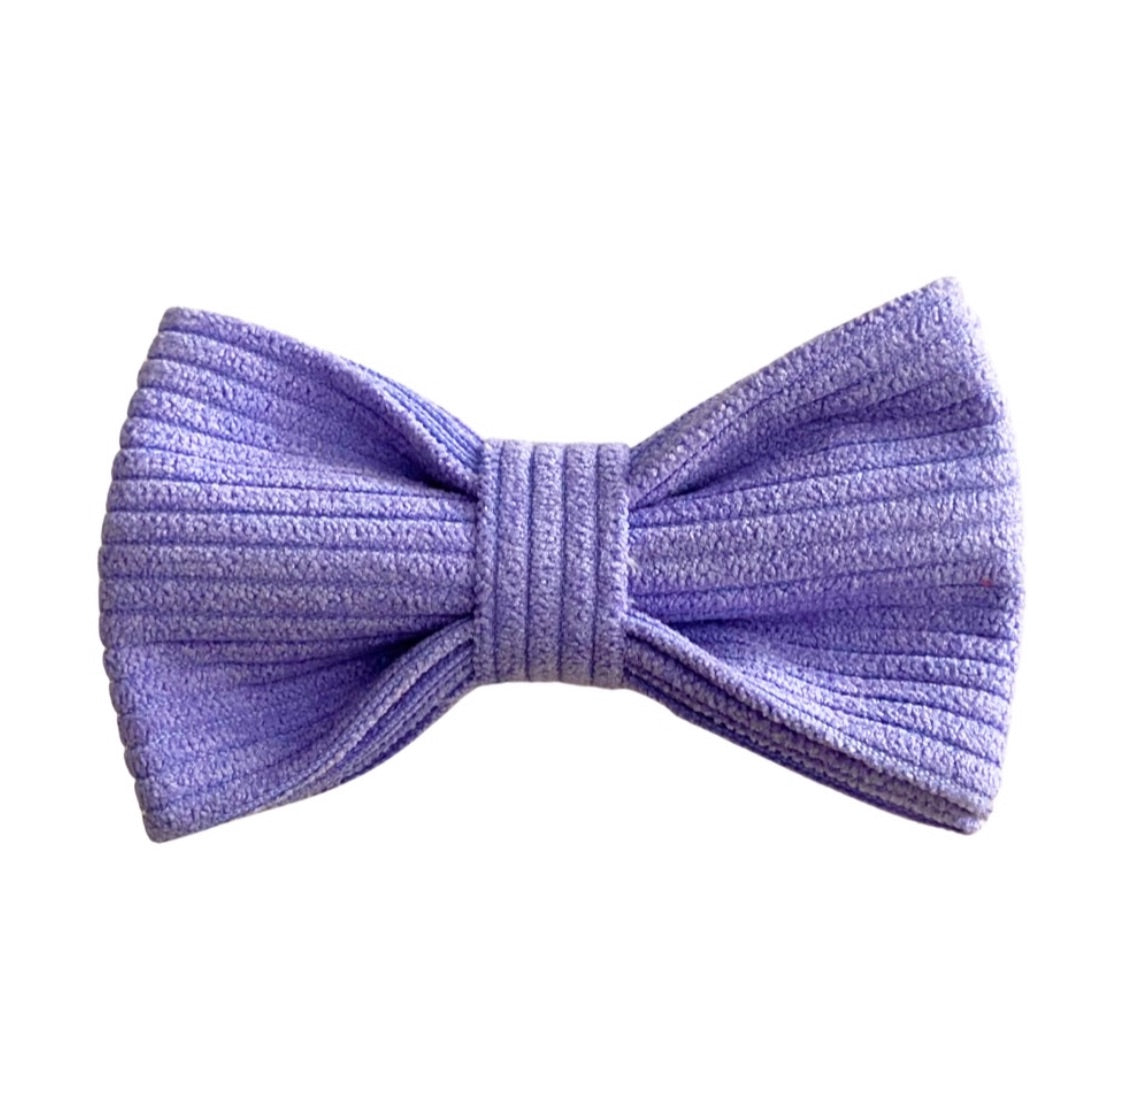 The Corduroy Bow Tie - Lilac